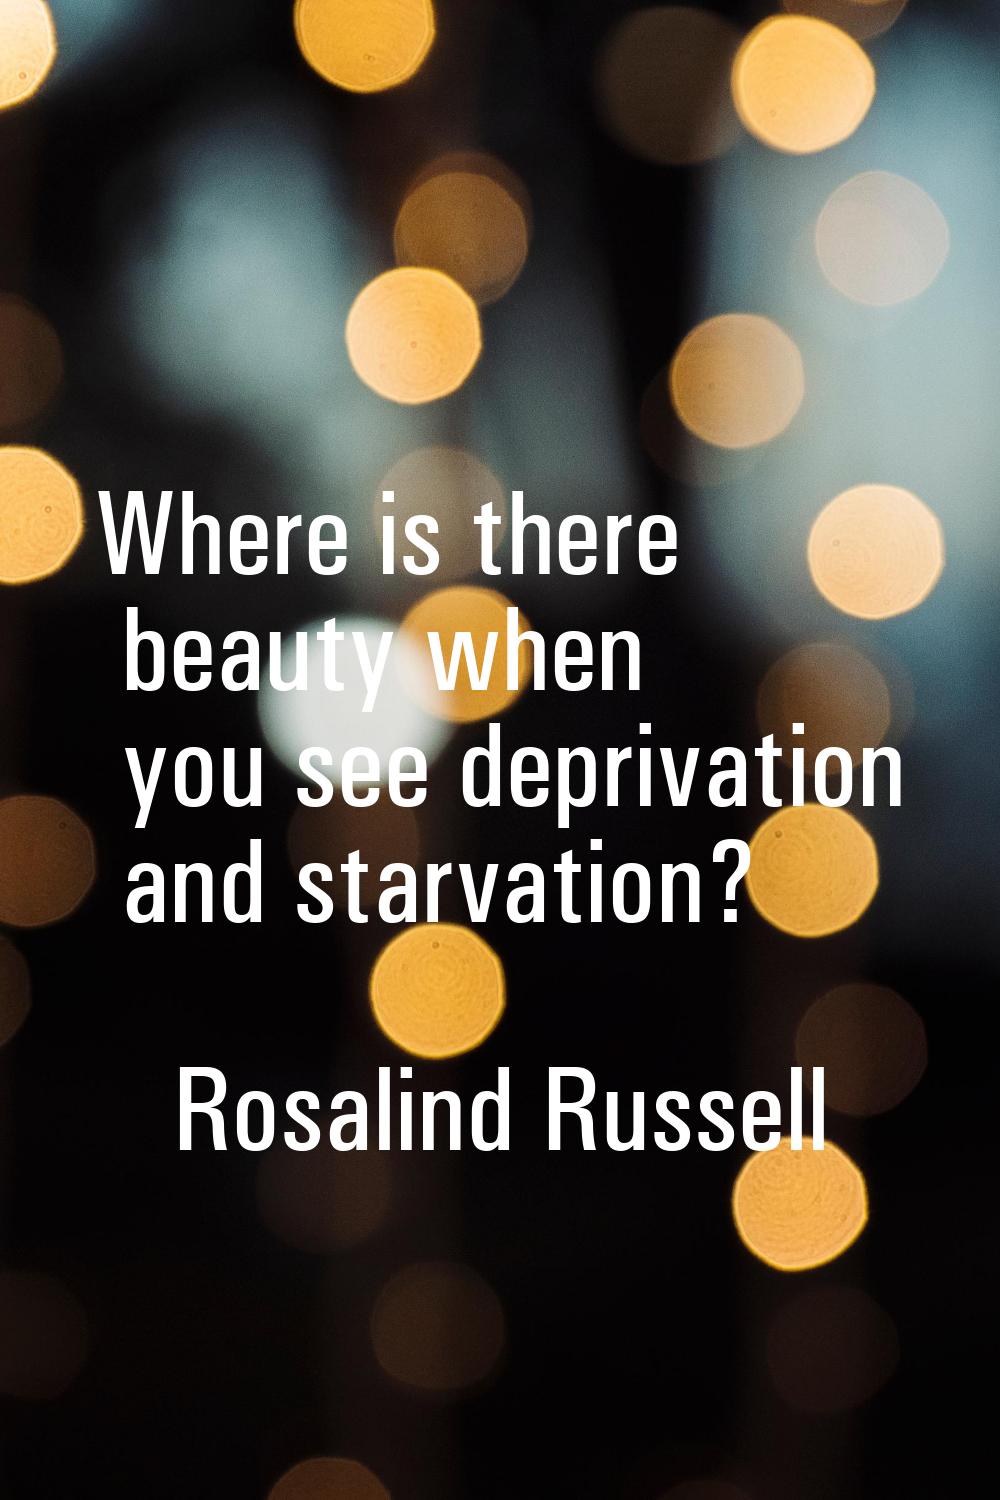 Where is there beauty when you see deprivation and starvation?